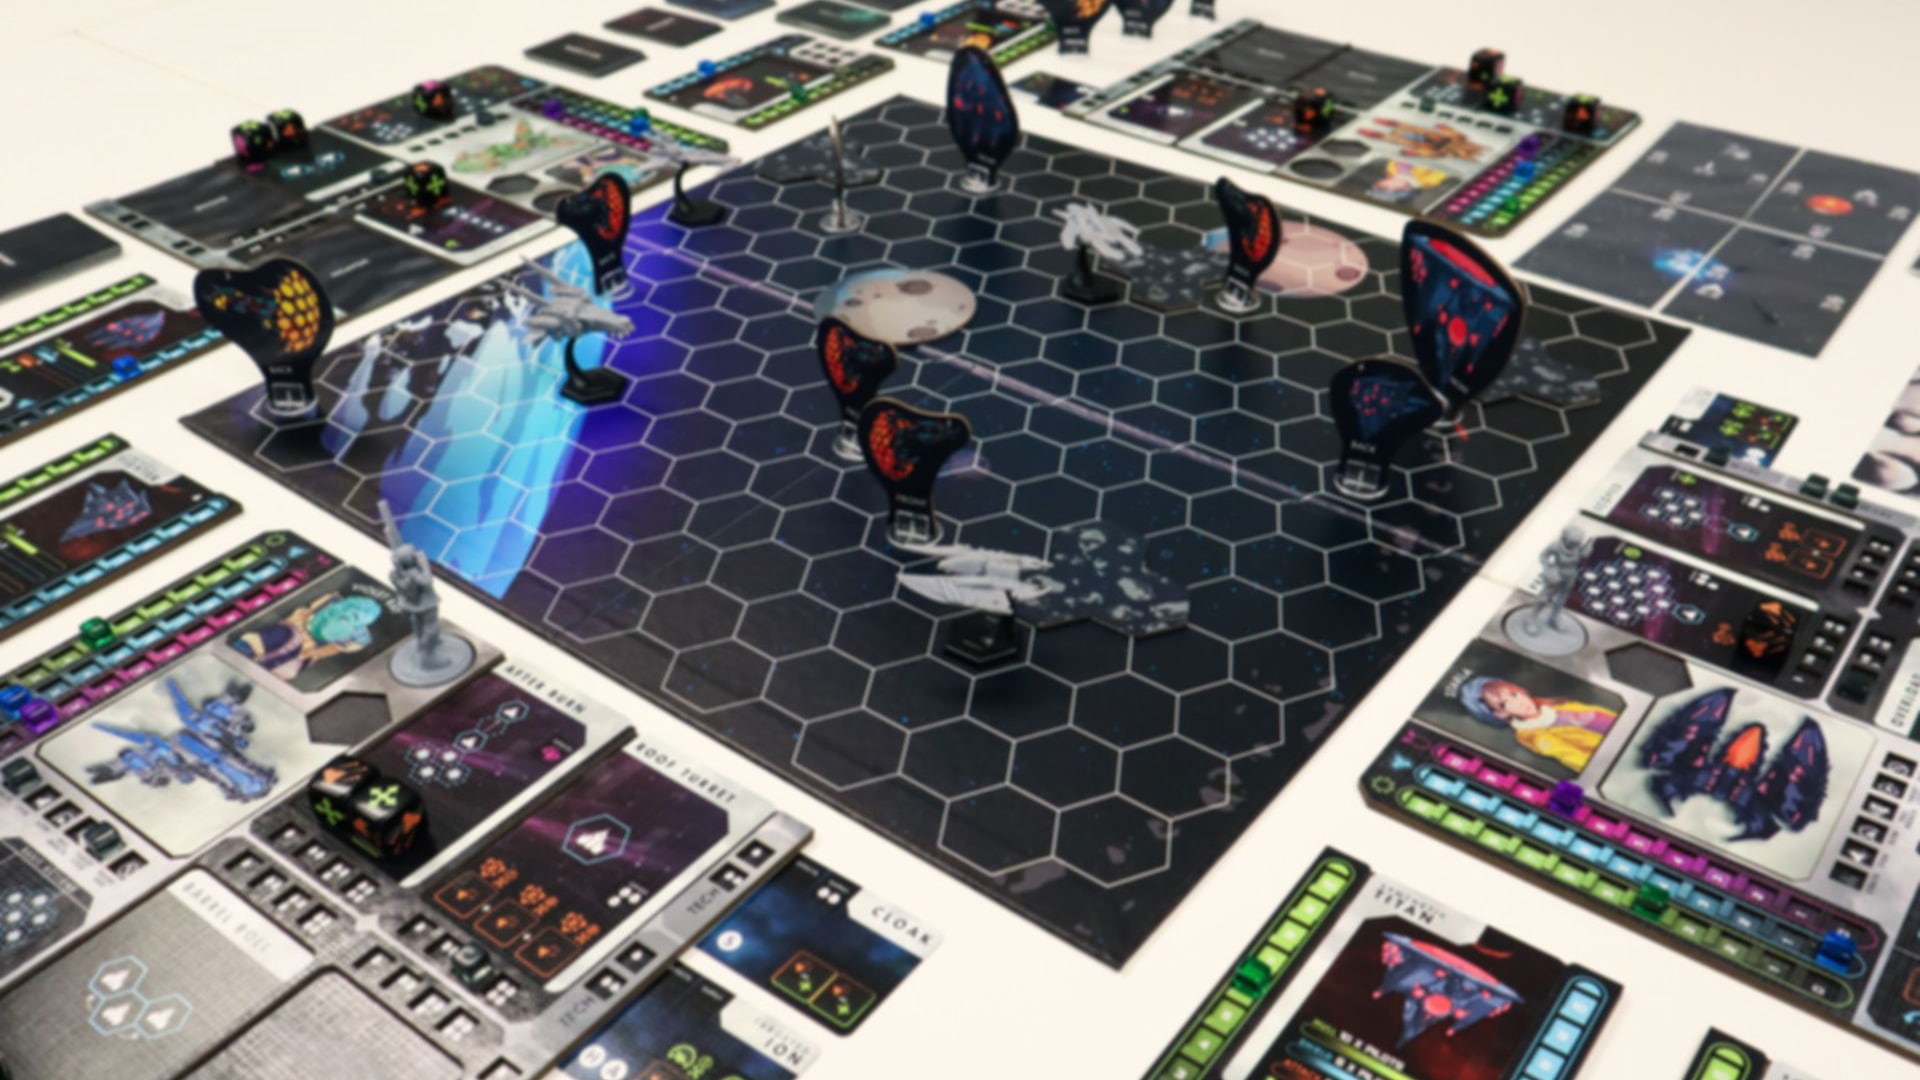 Engaging setup of 'Stars of Akarios' game, showcasing the game board, spacecraft miniatures, and thematic elements of this space adventure game.